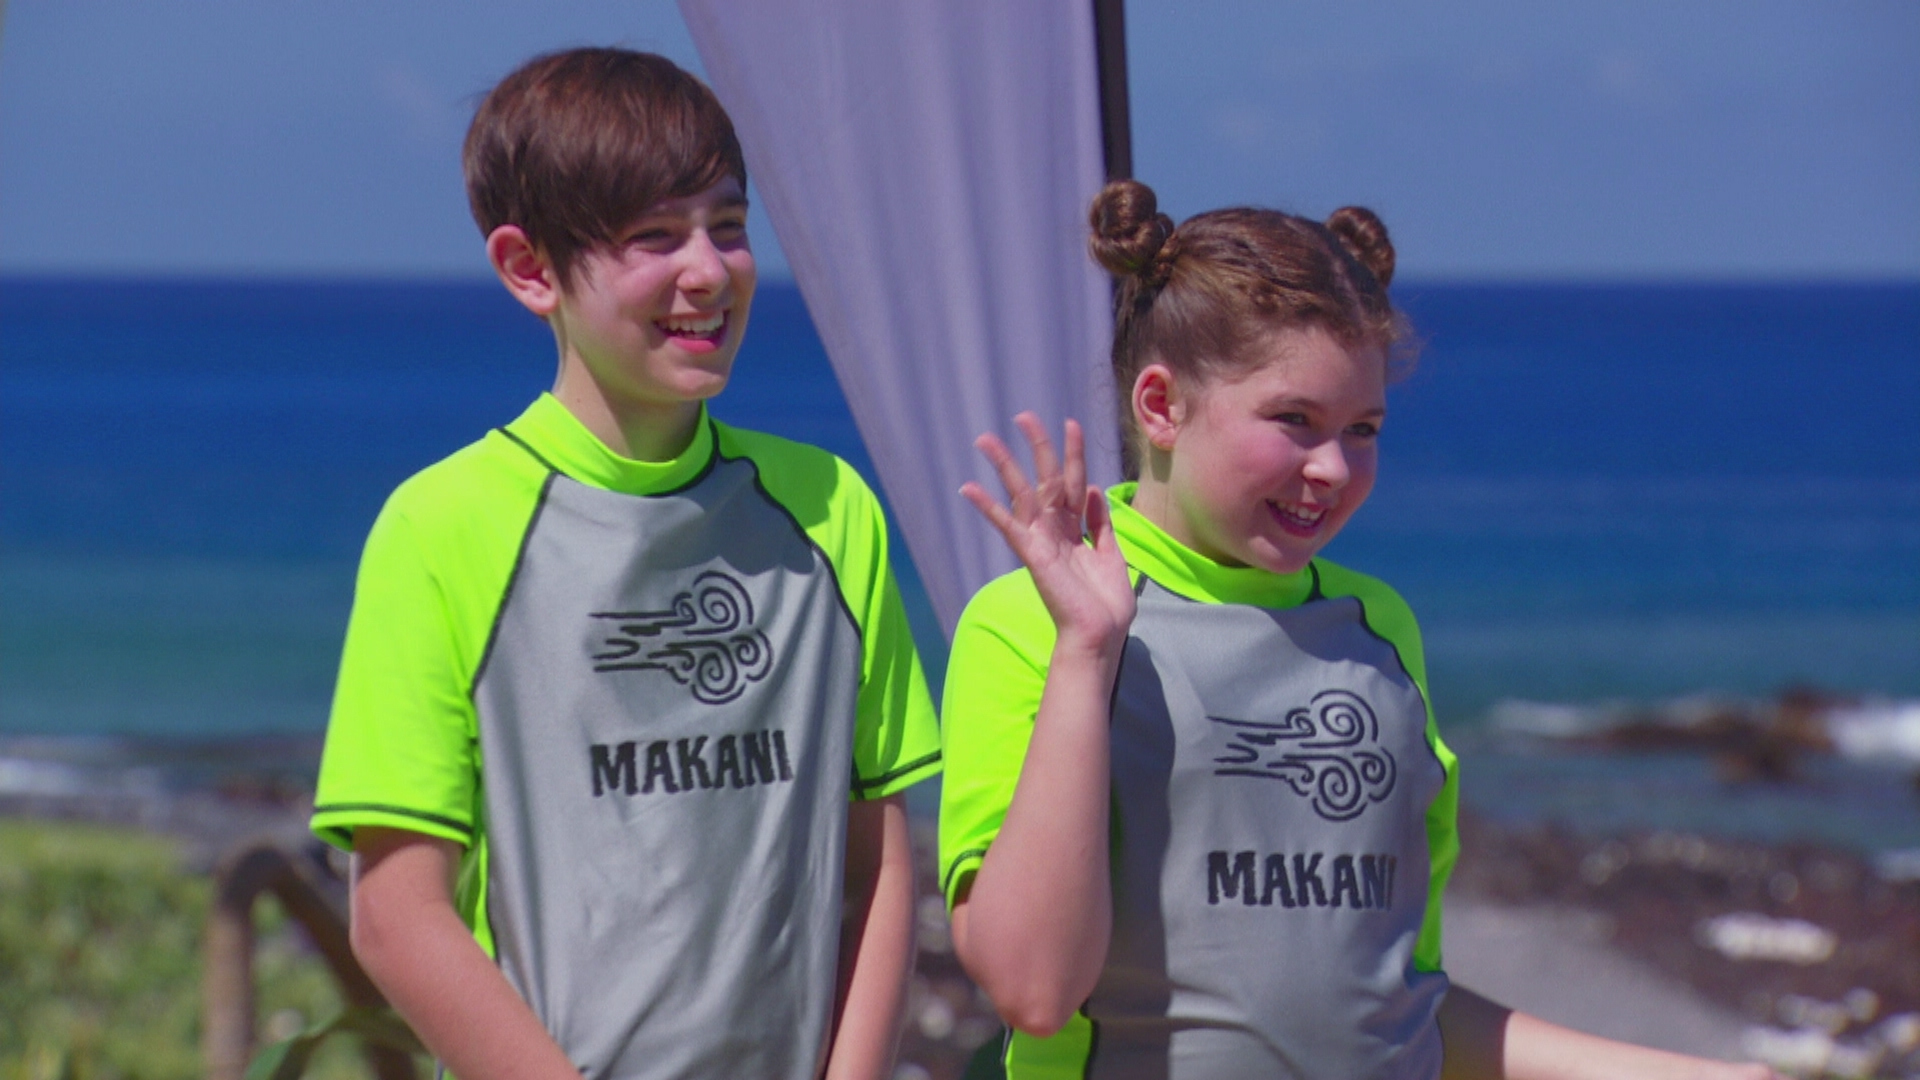 Nickelodeon - Today's episode of Paradise Run is gonna be fierce! 💪 Who  would you pick to be on your team?